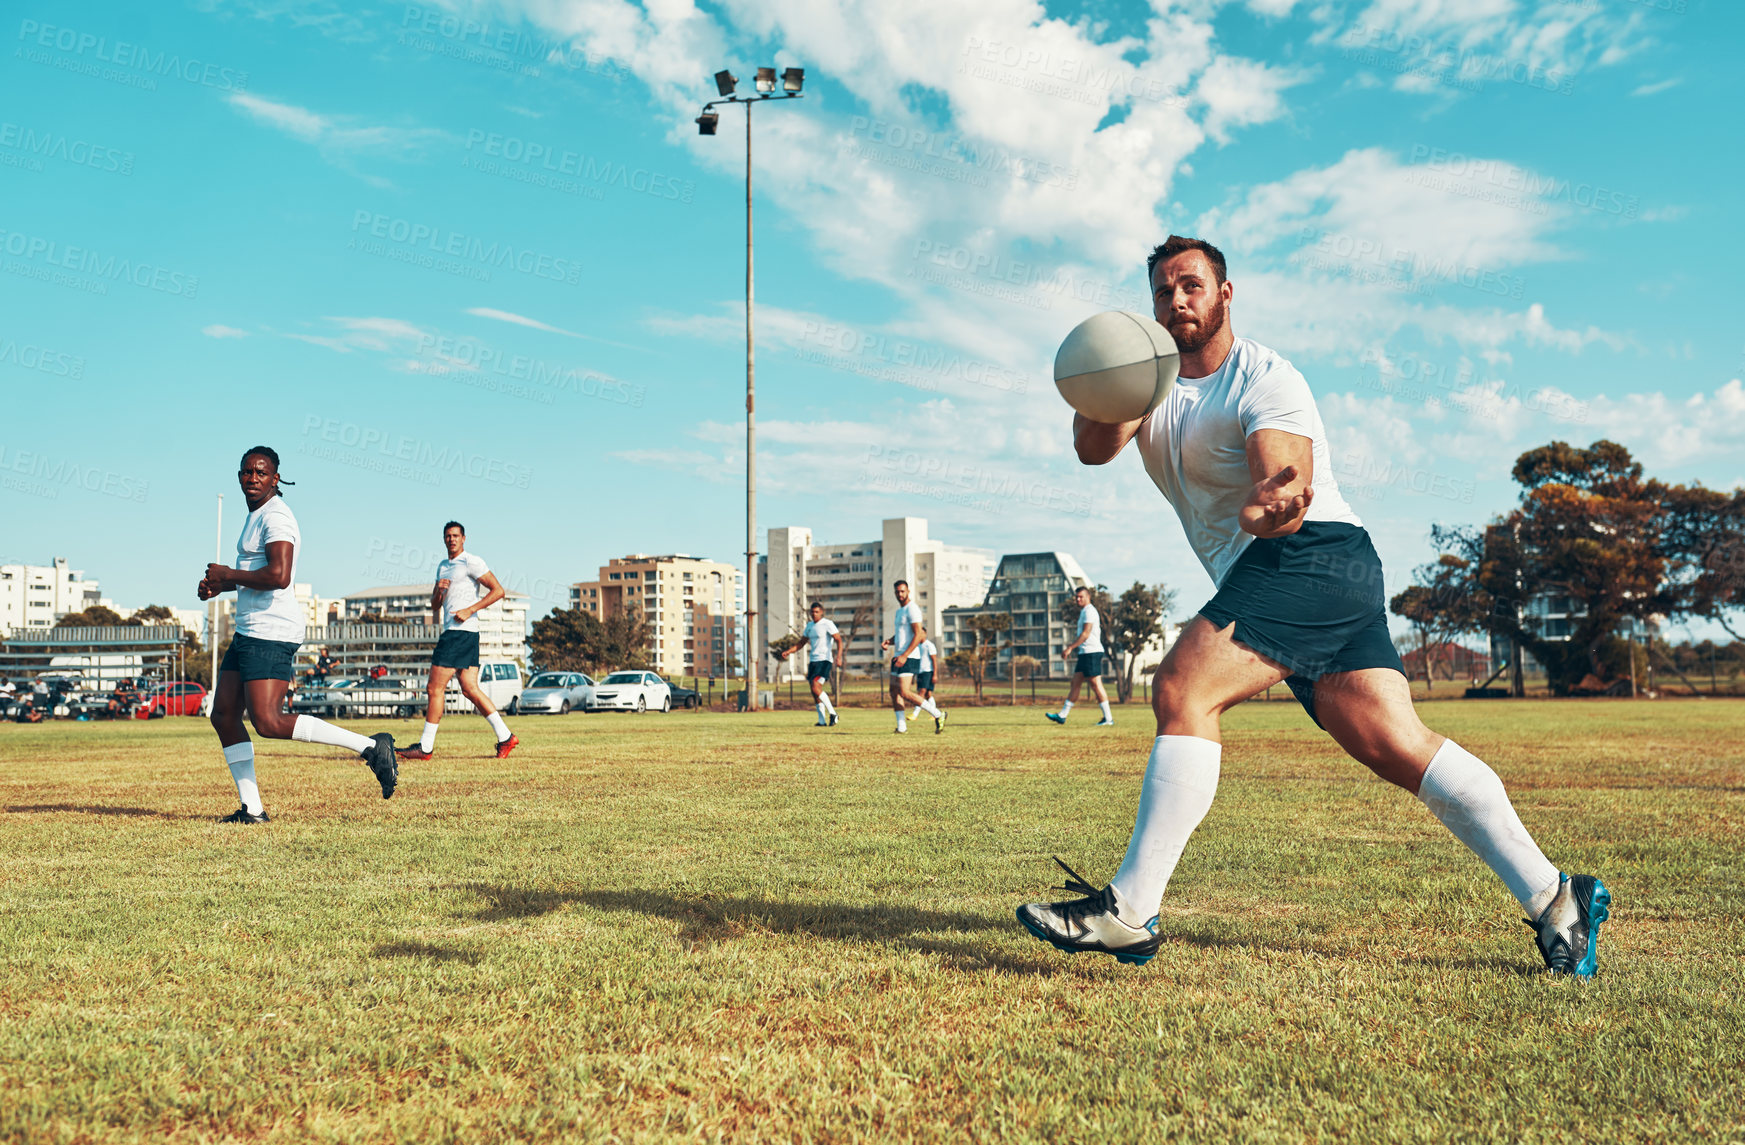 Buy stock photo Shot of young men playing a game of rugby on a field